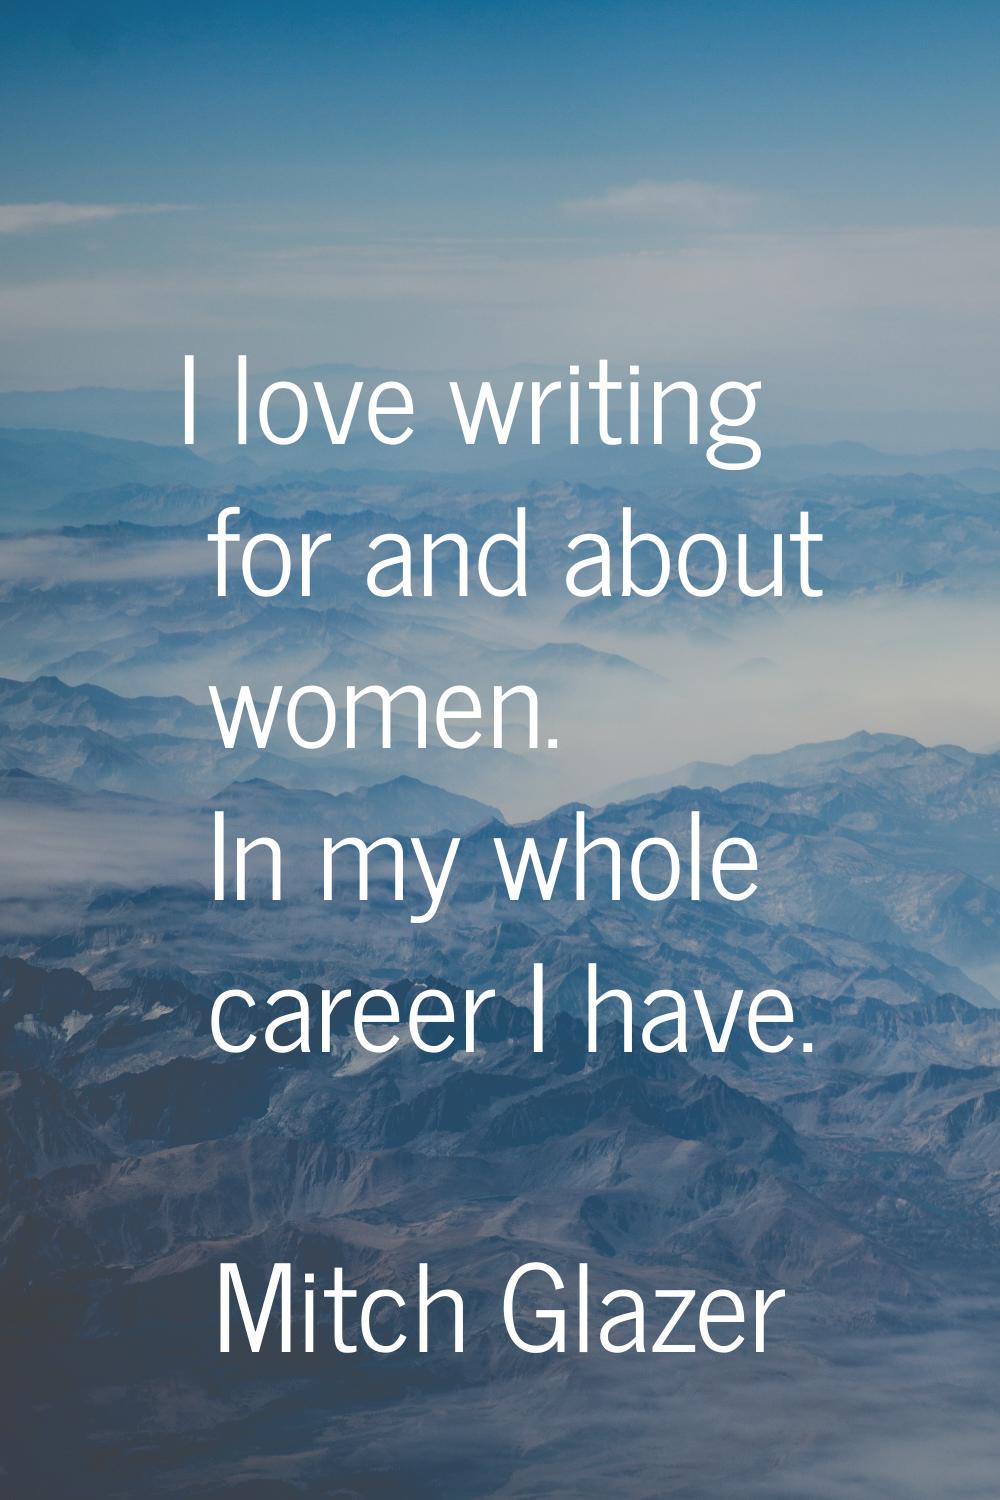 I love writing for and about women. In my whole career I have.